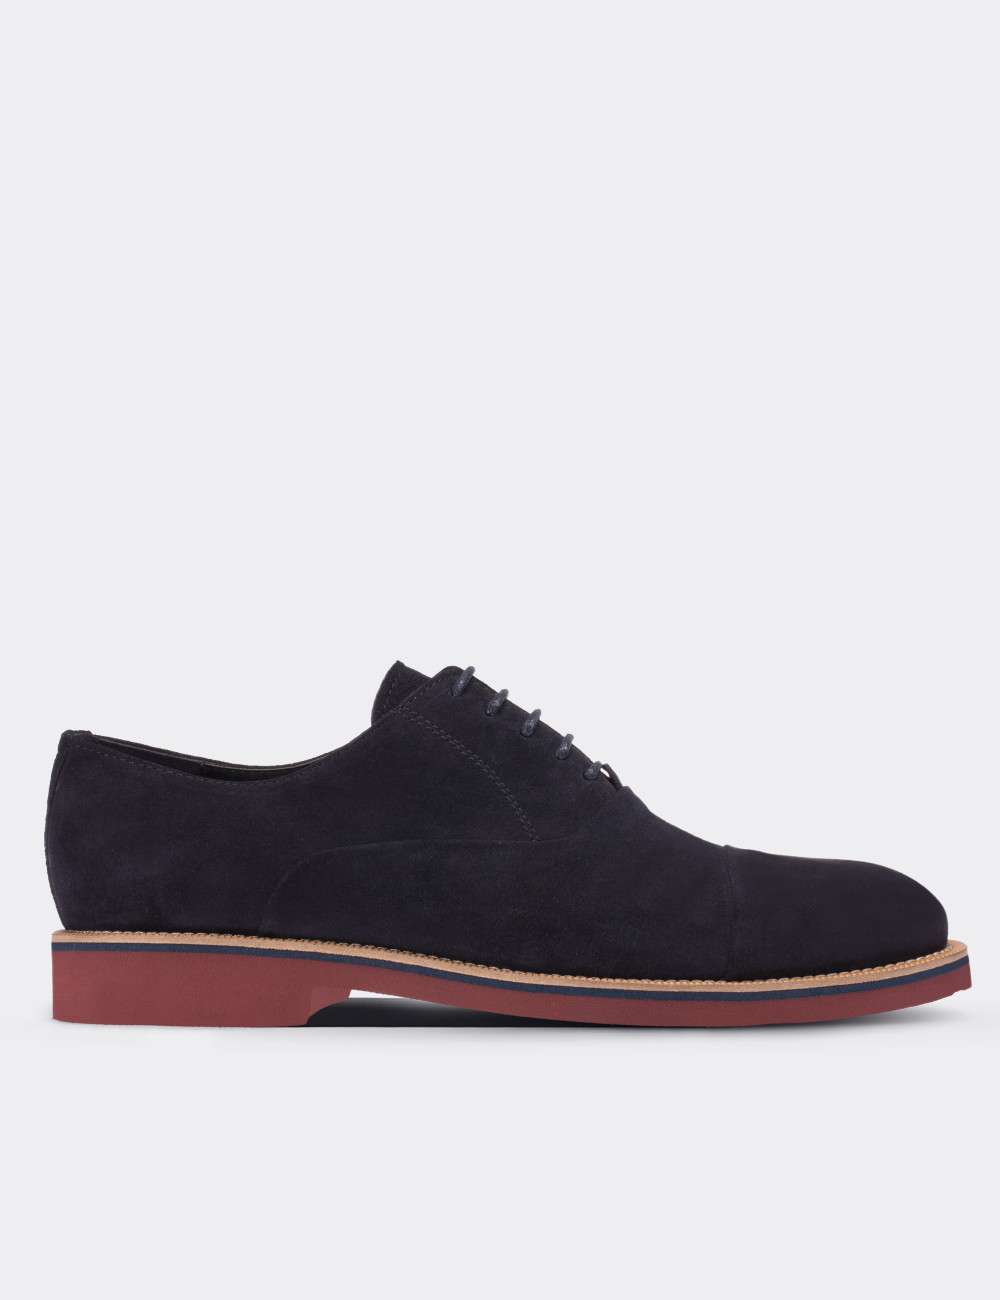 Navy Suede Leather Lace-up Shoes - 01590MLCVE04